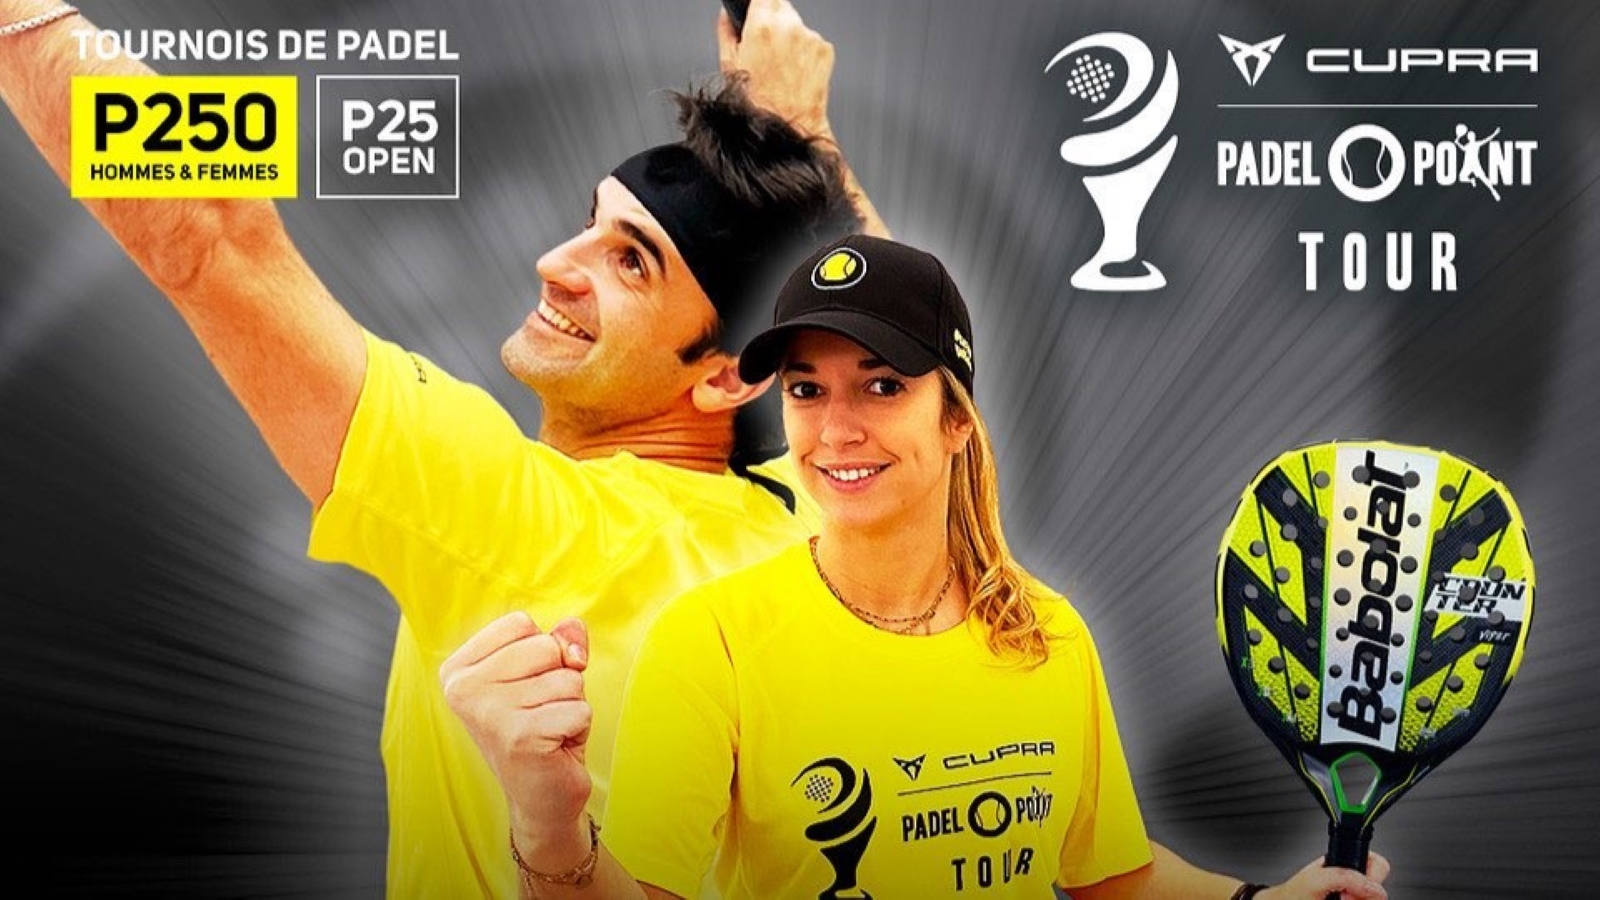 CUPRA PADEL POINT TOUR POSTER DI MONTPELLIER